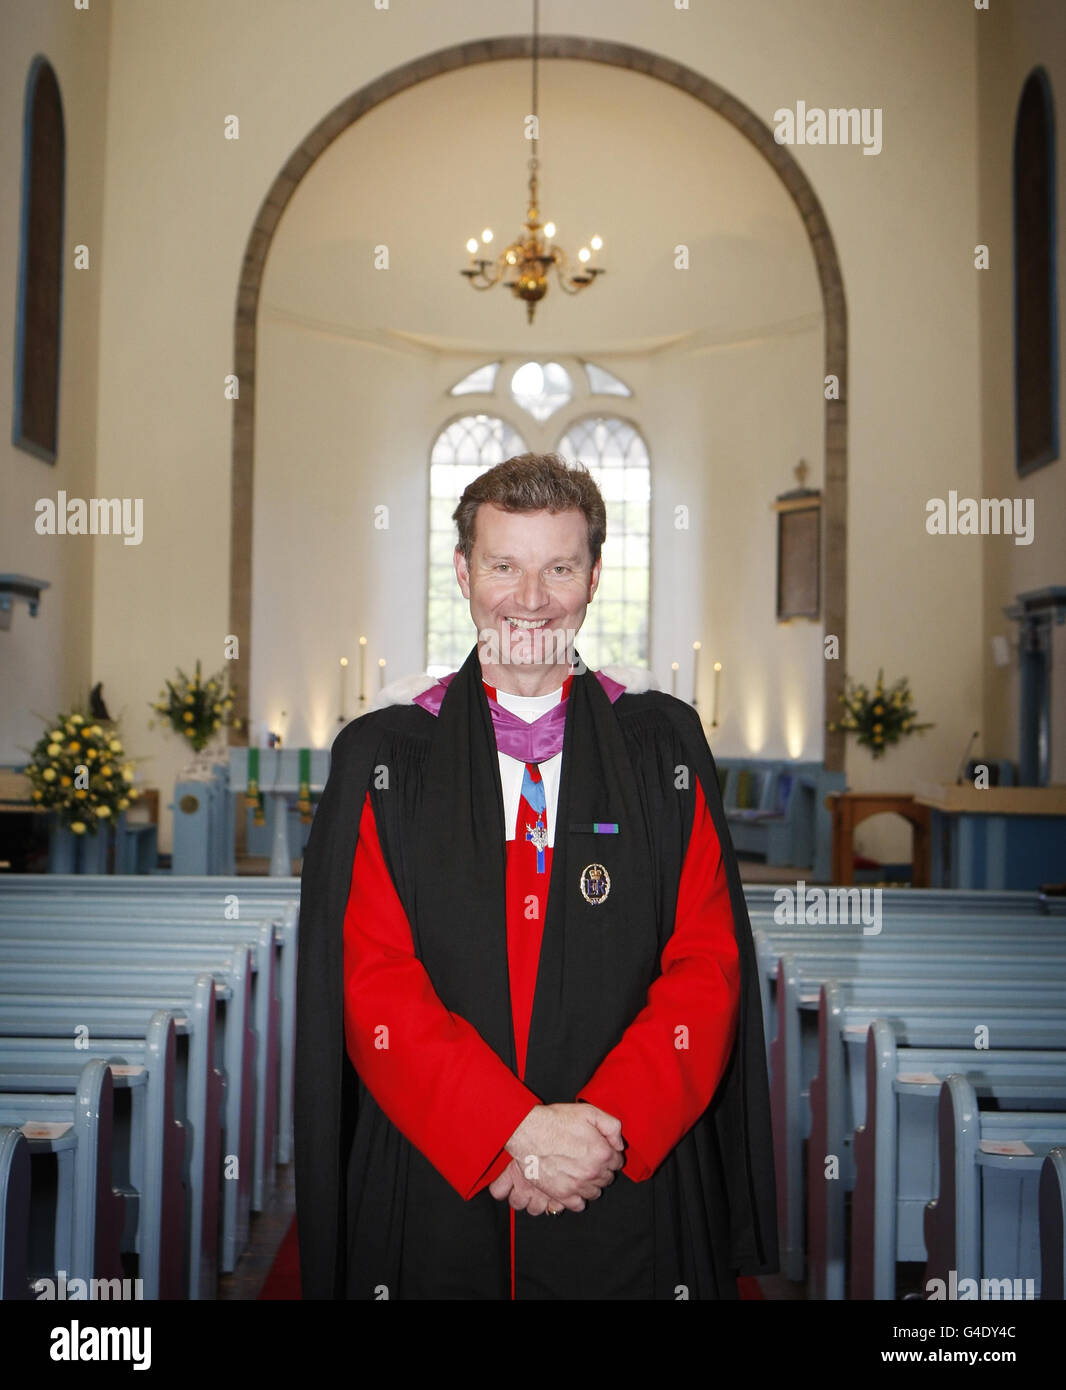 The Reverend Neil Gardner at the Canongate Kirk in Edinburgh, Scotland, where Zara Phillips will marry her fiance, rugby international Mike Tindall, later this month. Stock Photo